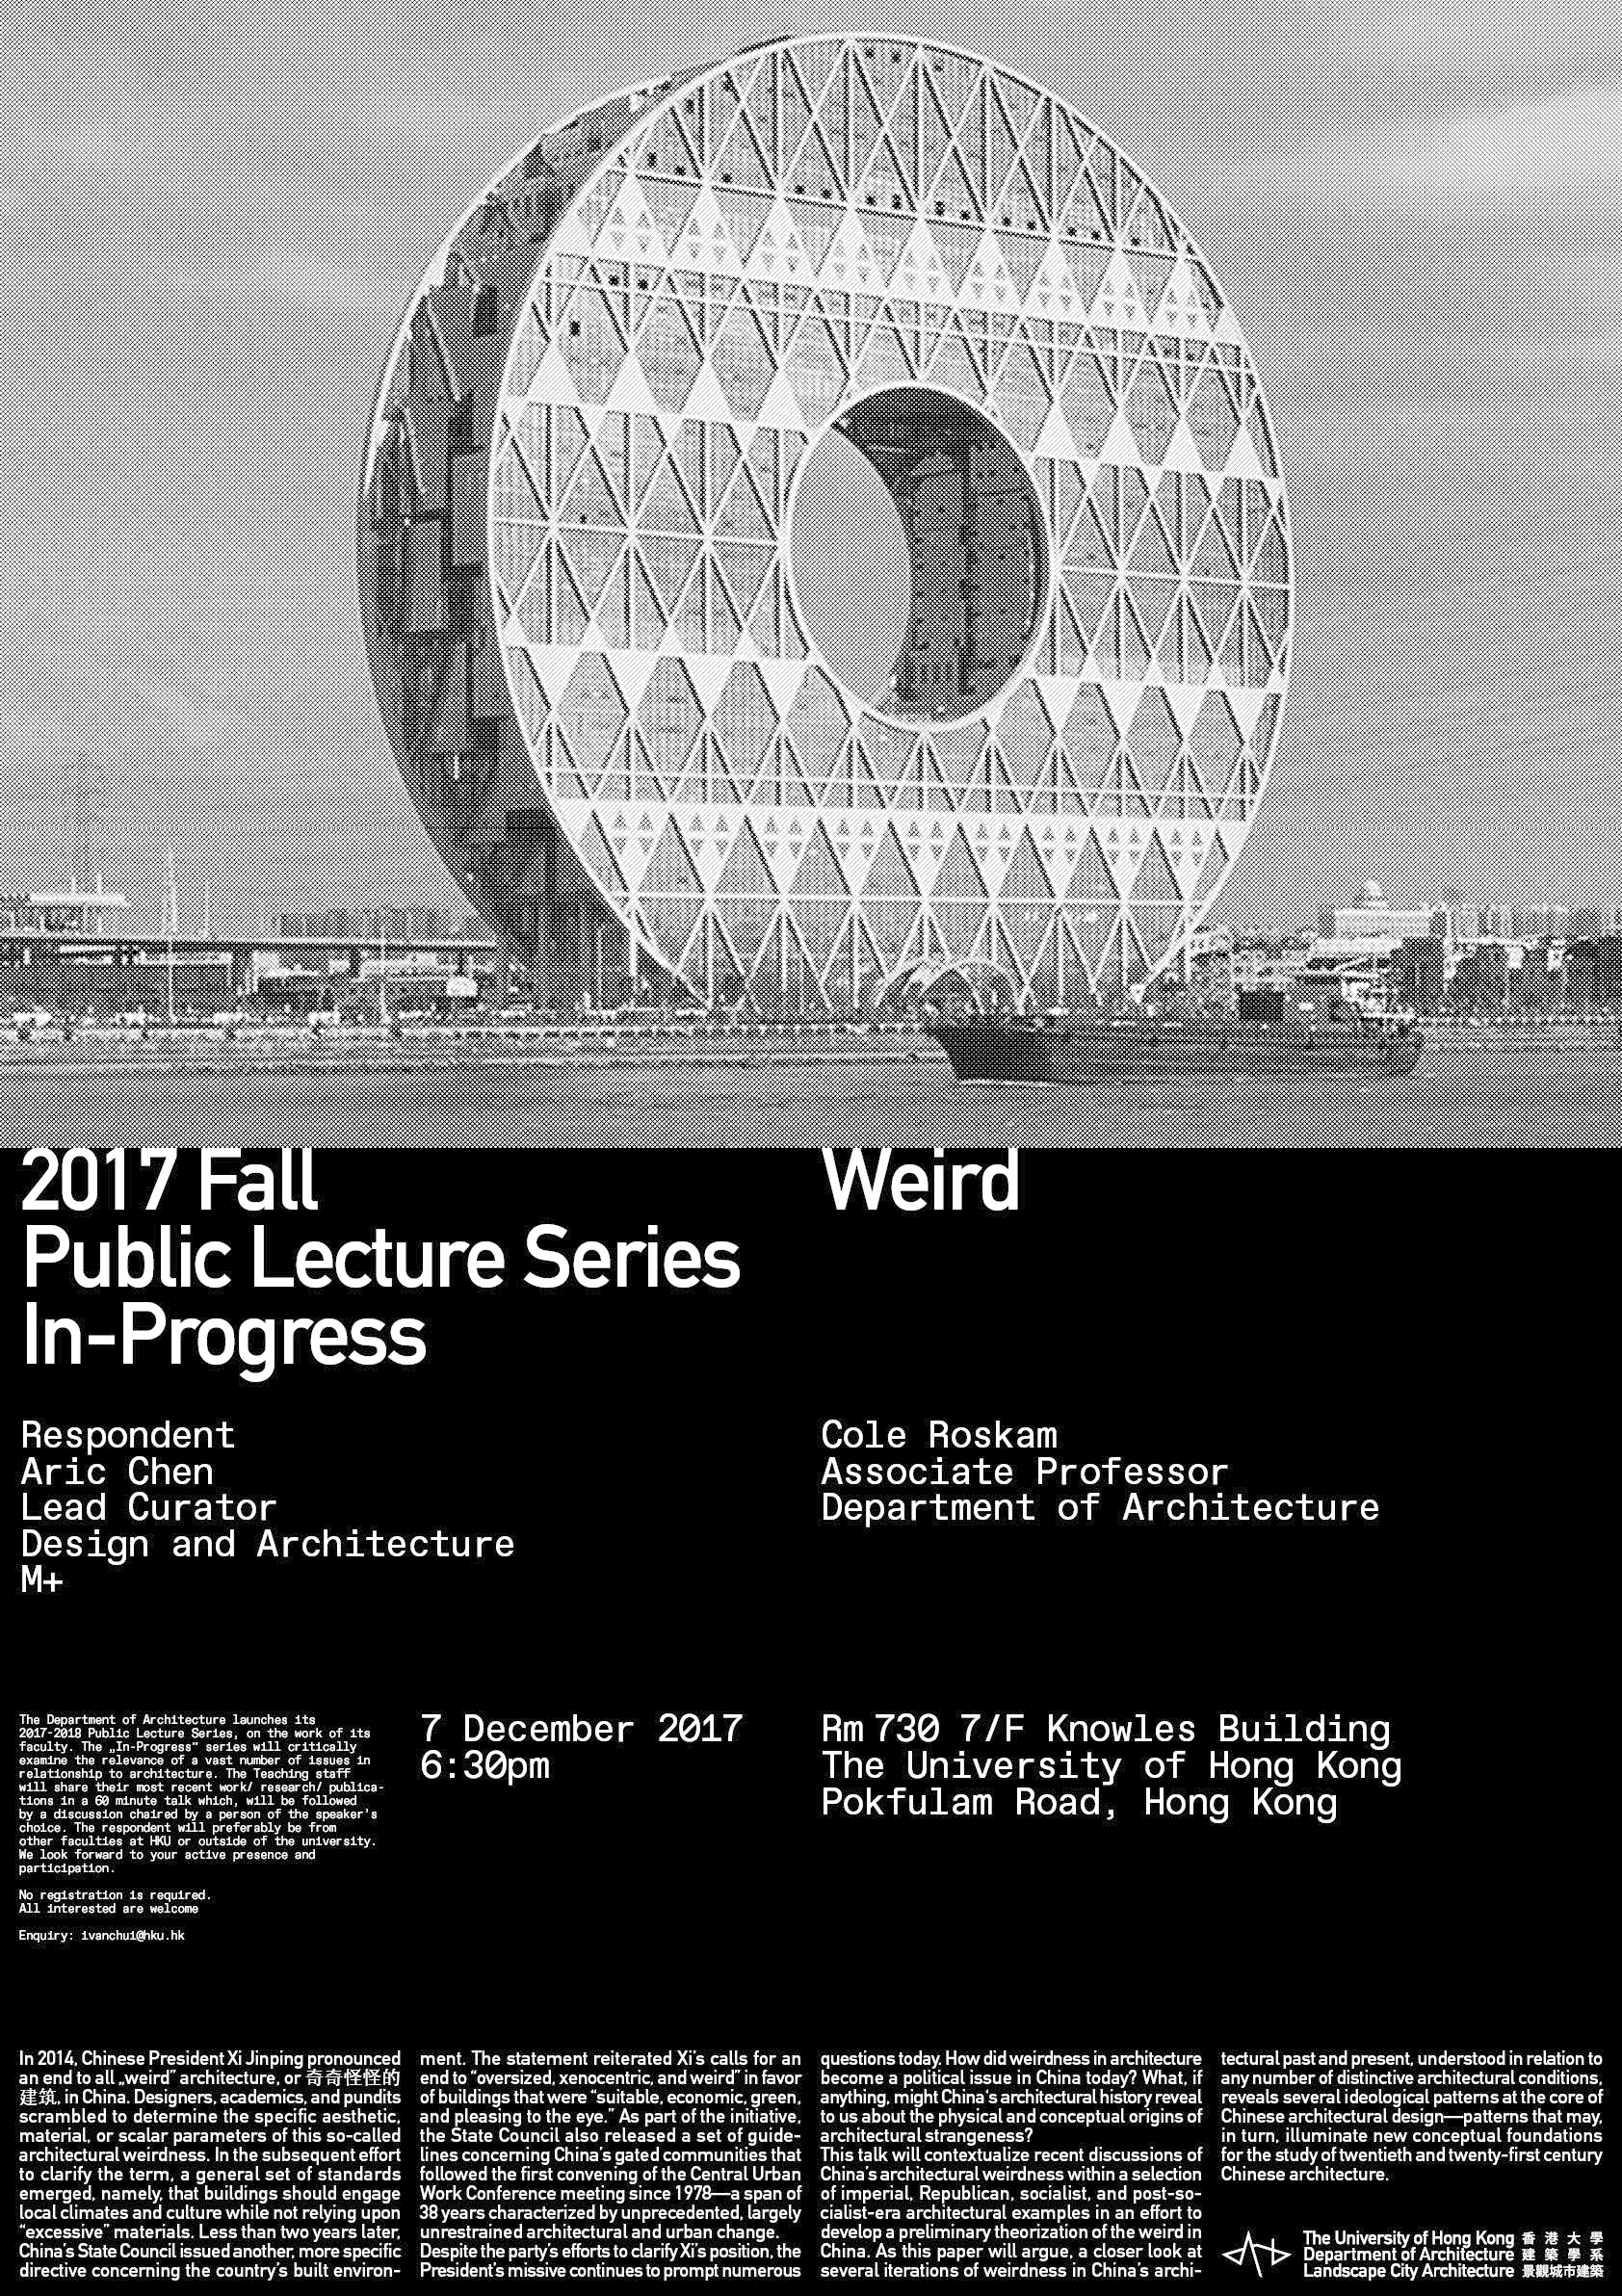 Department of Architecture Public Lecture Series: 'Weird' by Dr Cole Roskam